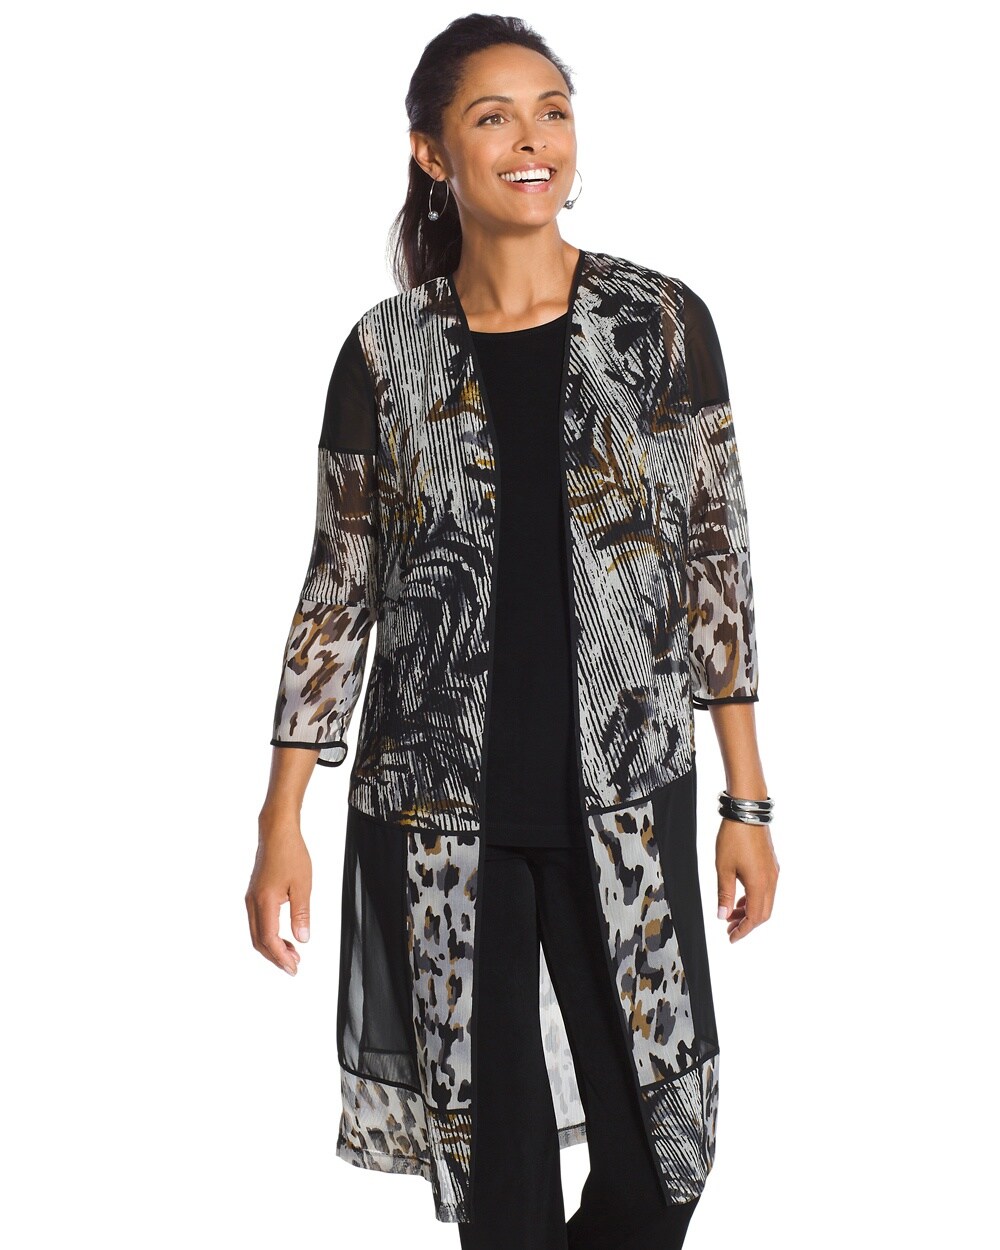 Patchwork Sheer Duster Jacket - Chico's